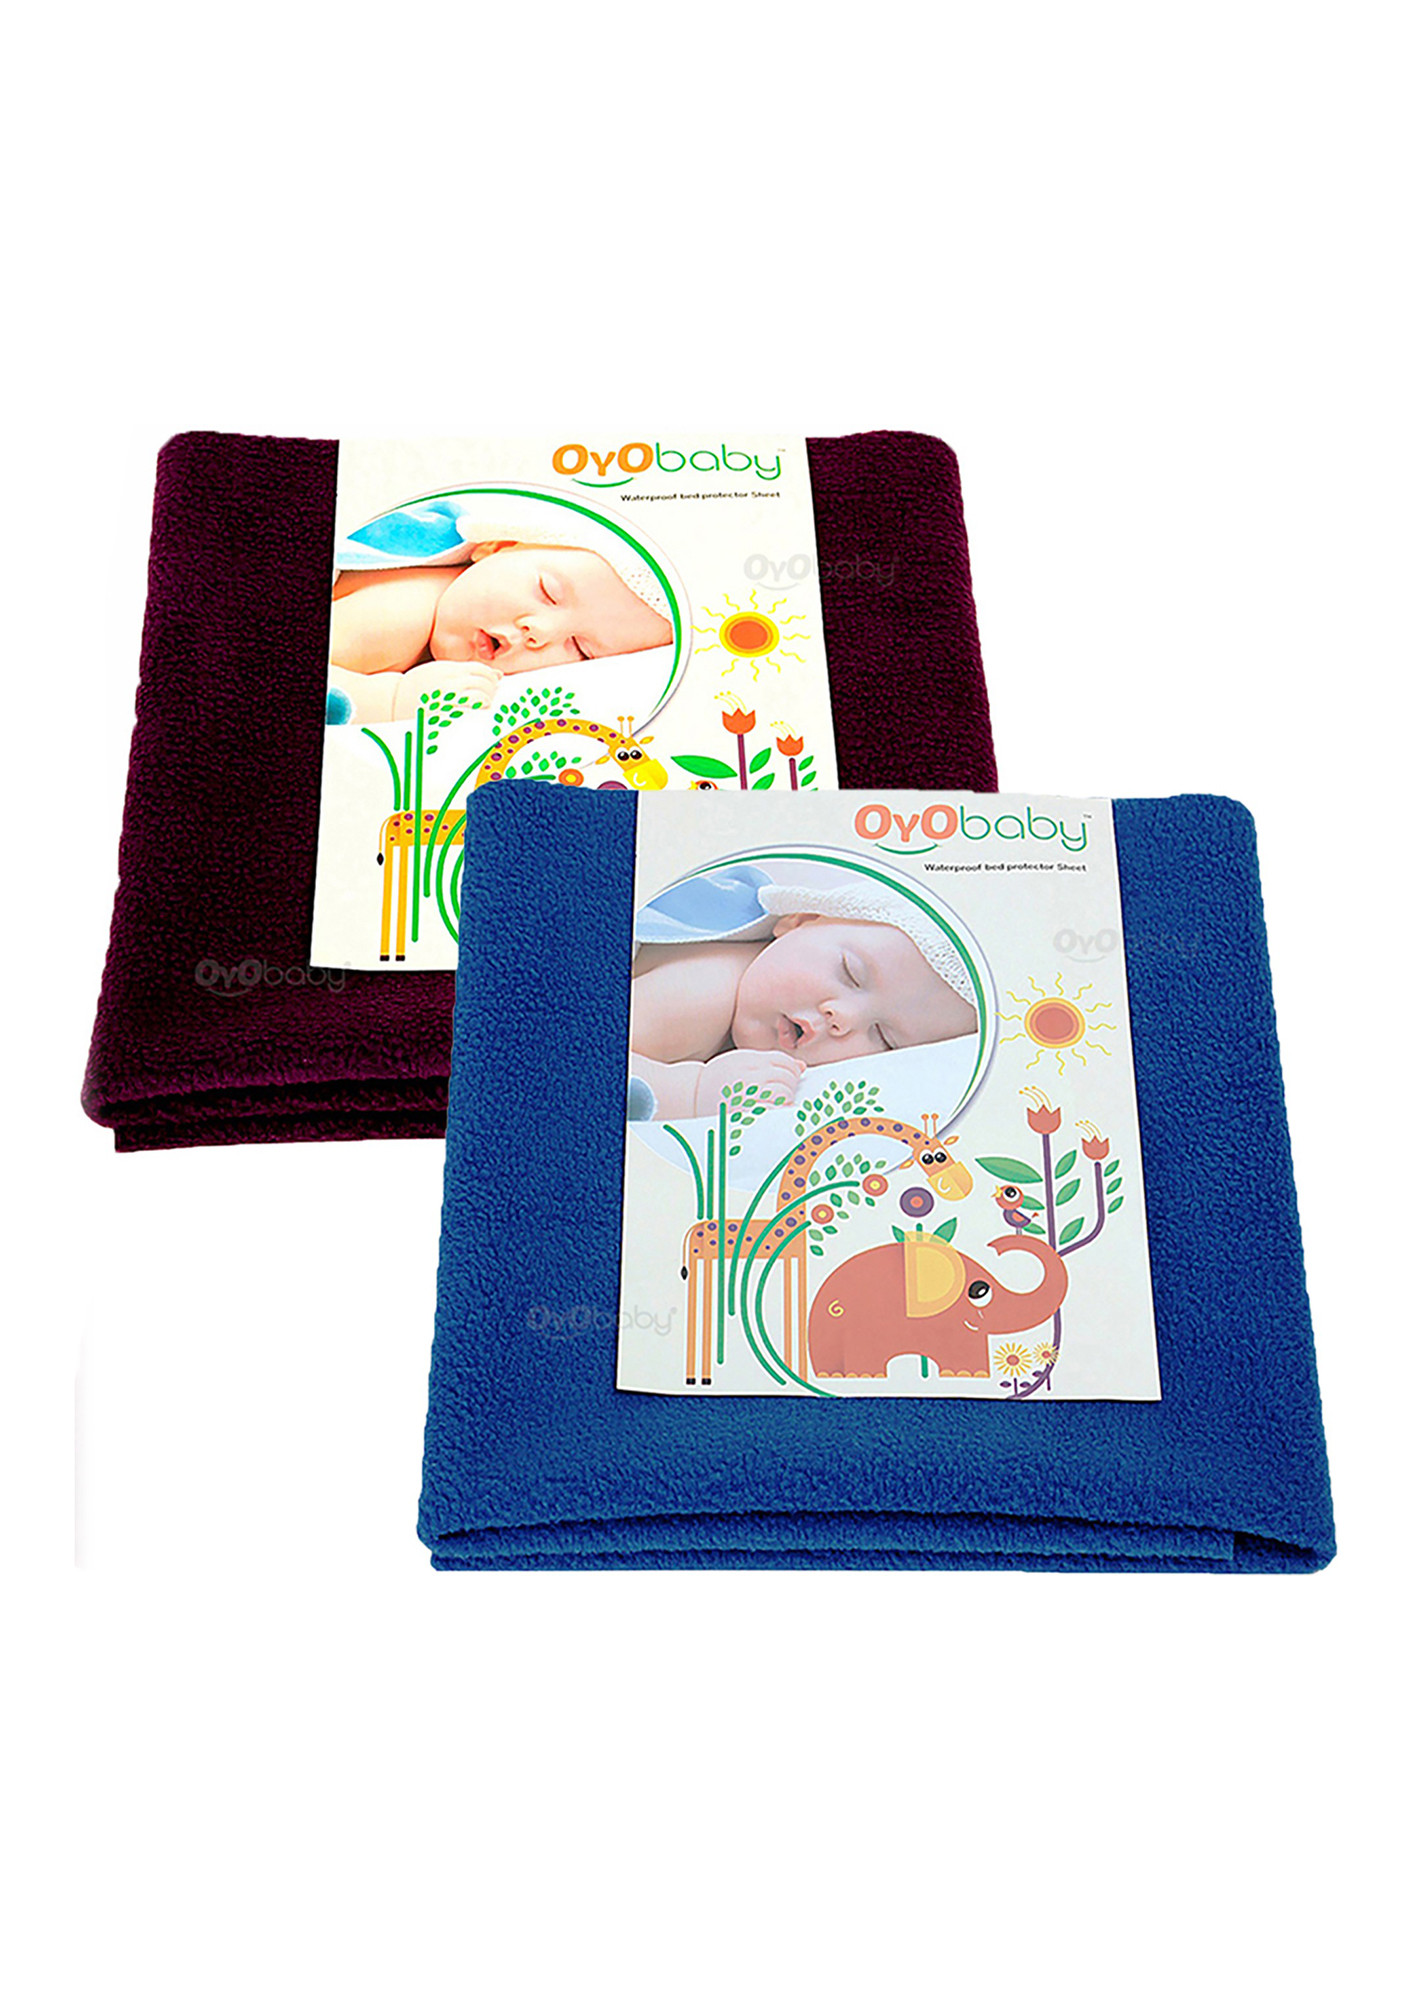 Oyo Baby Baby Bed Protector Sheet, Baby Waterproof Sheet, Baby Dry Sheet Pack Of 2 (Royal Blue, Plum)-OB-2009-RB+PL